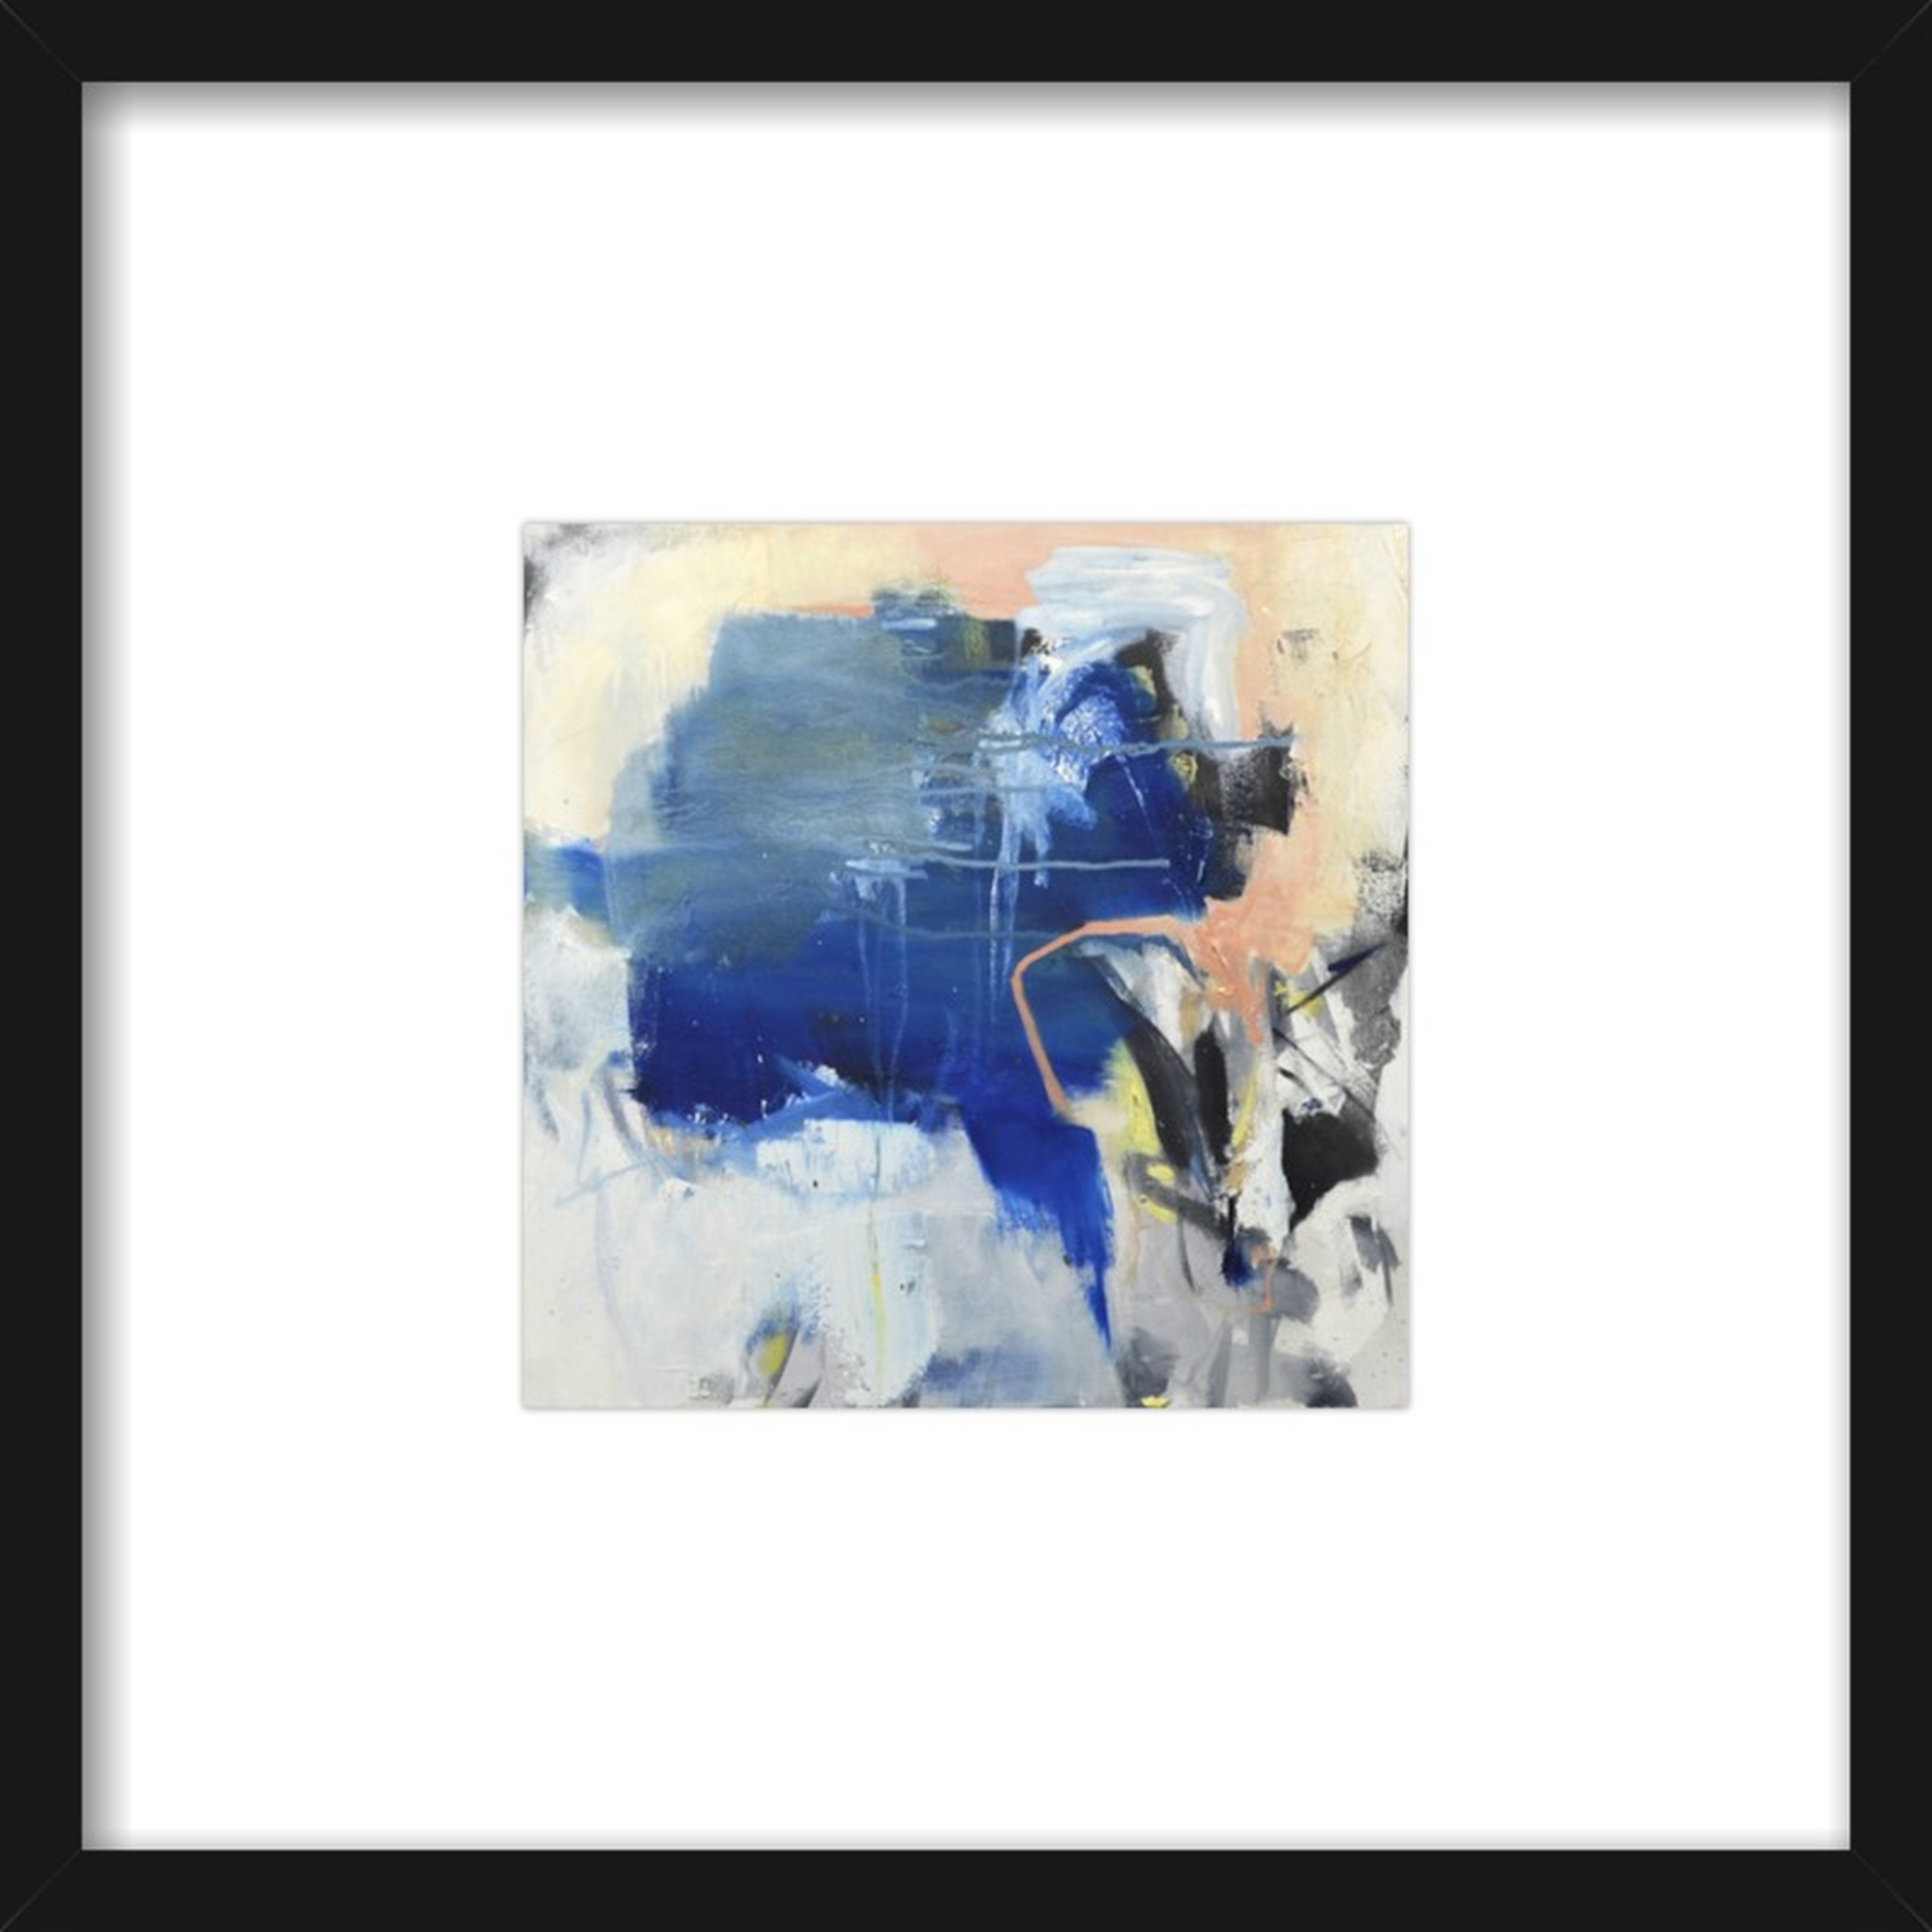 Owning by Alison Causer for Artfully Walls - Artfully Walls